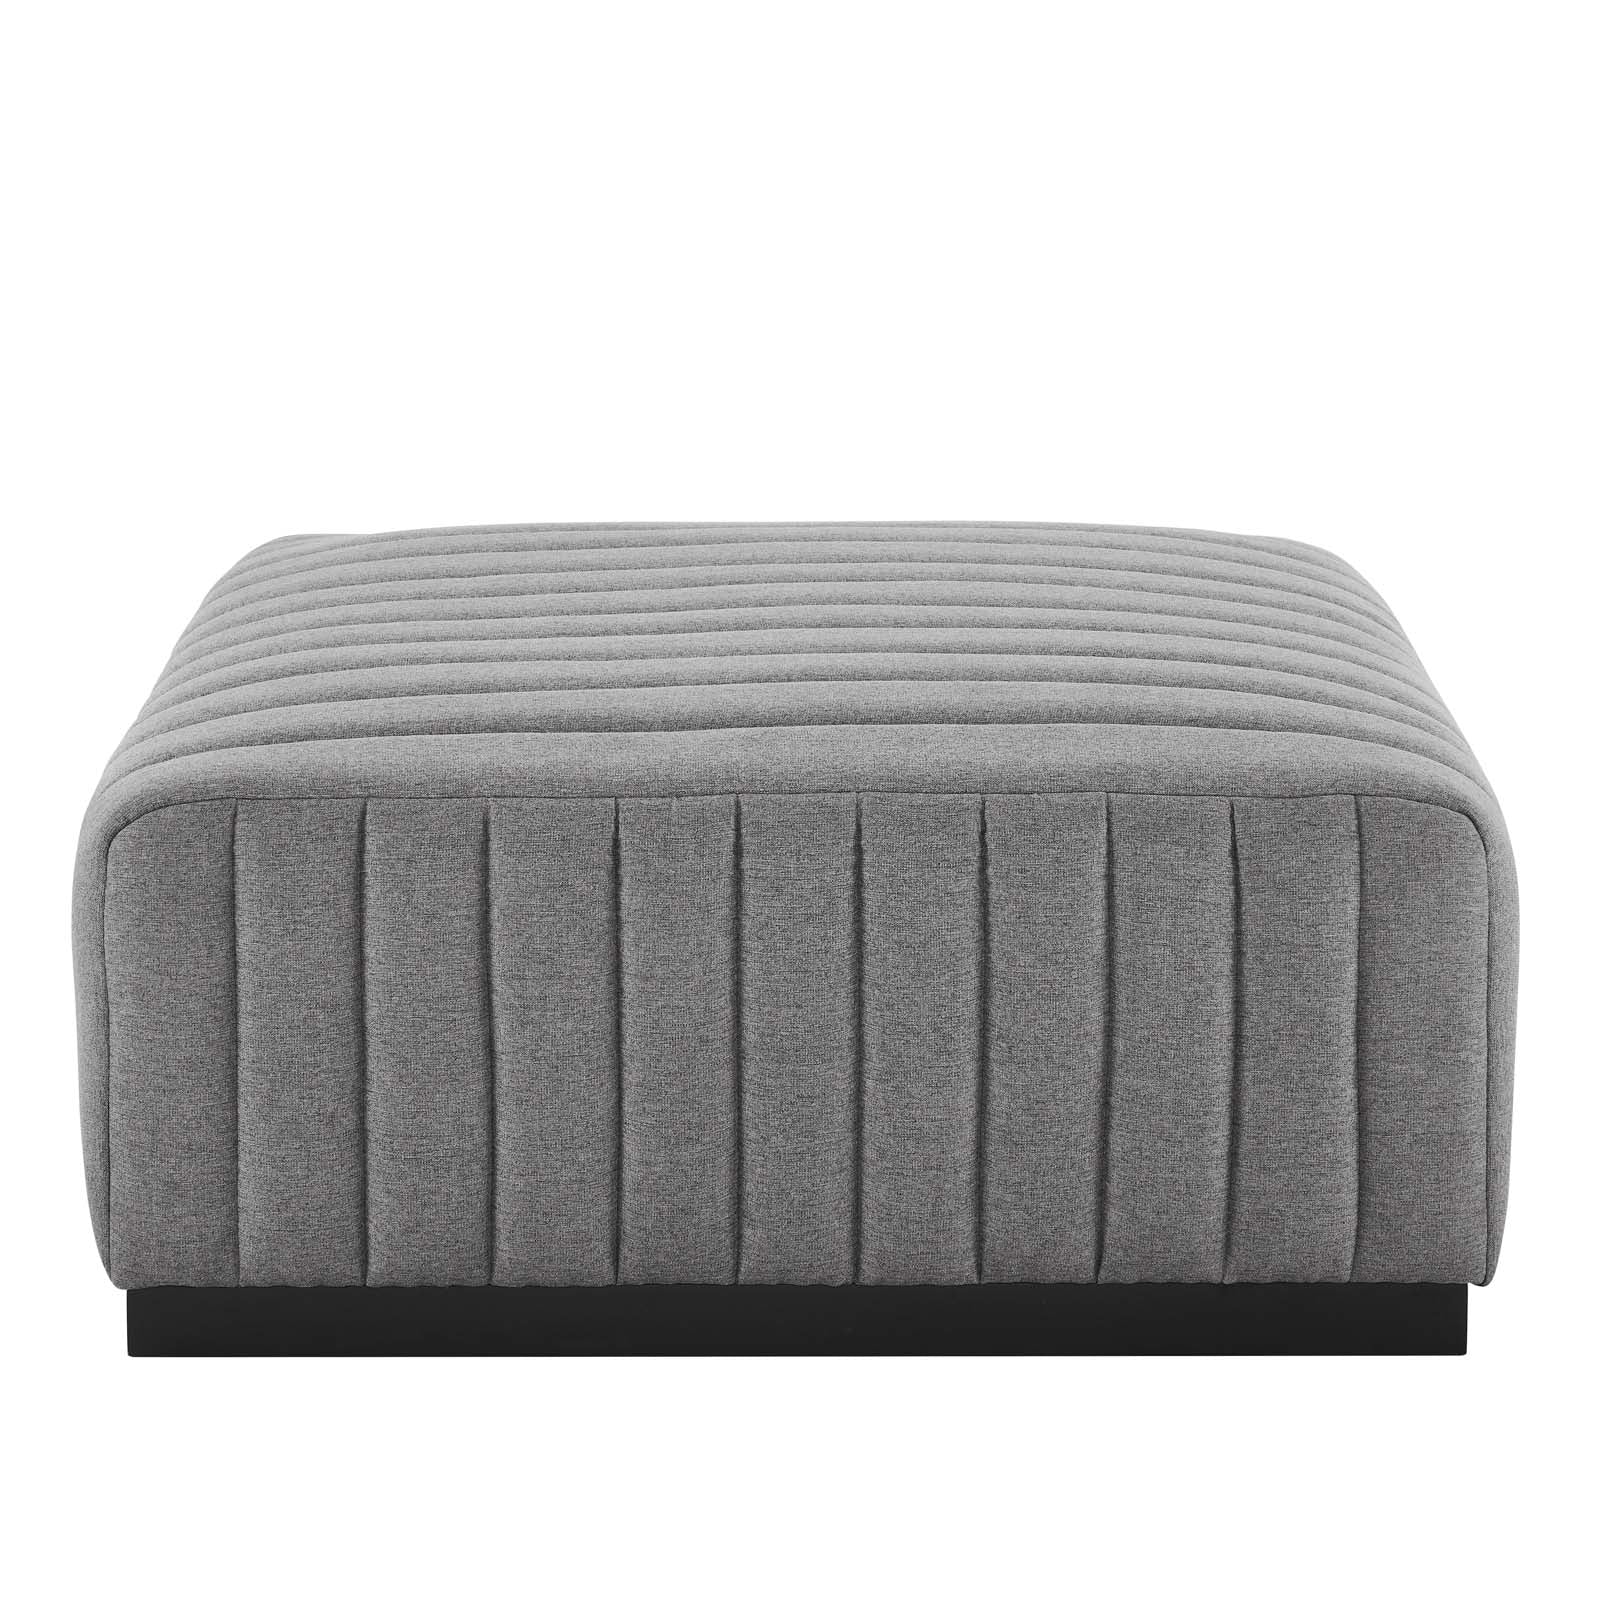 Conjure Channel Tufted Upholstered Fabric Ottoman-Ottoman-Modway-Wall2Wall Furnishings